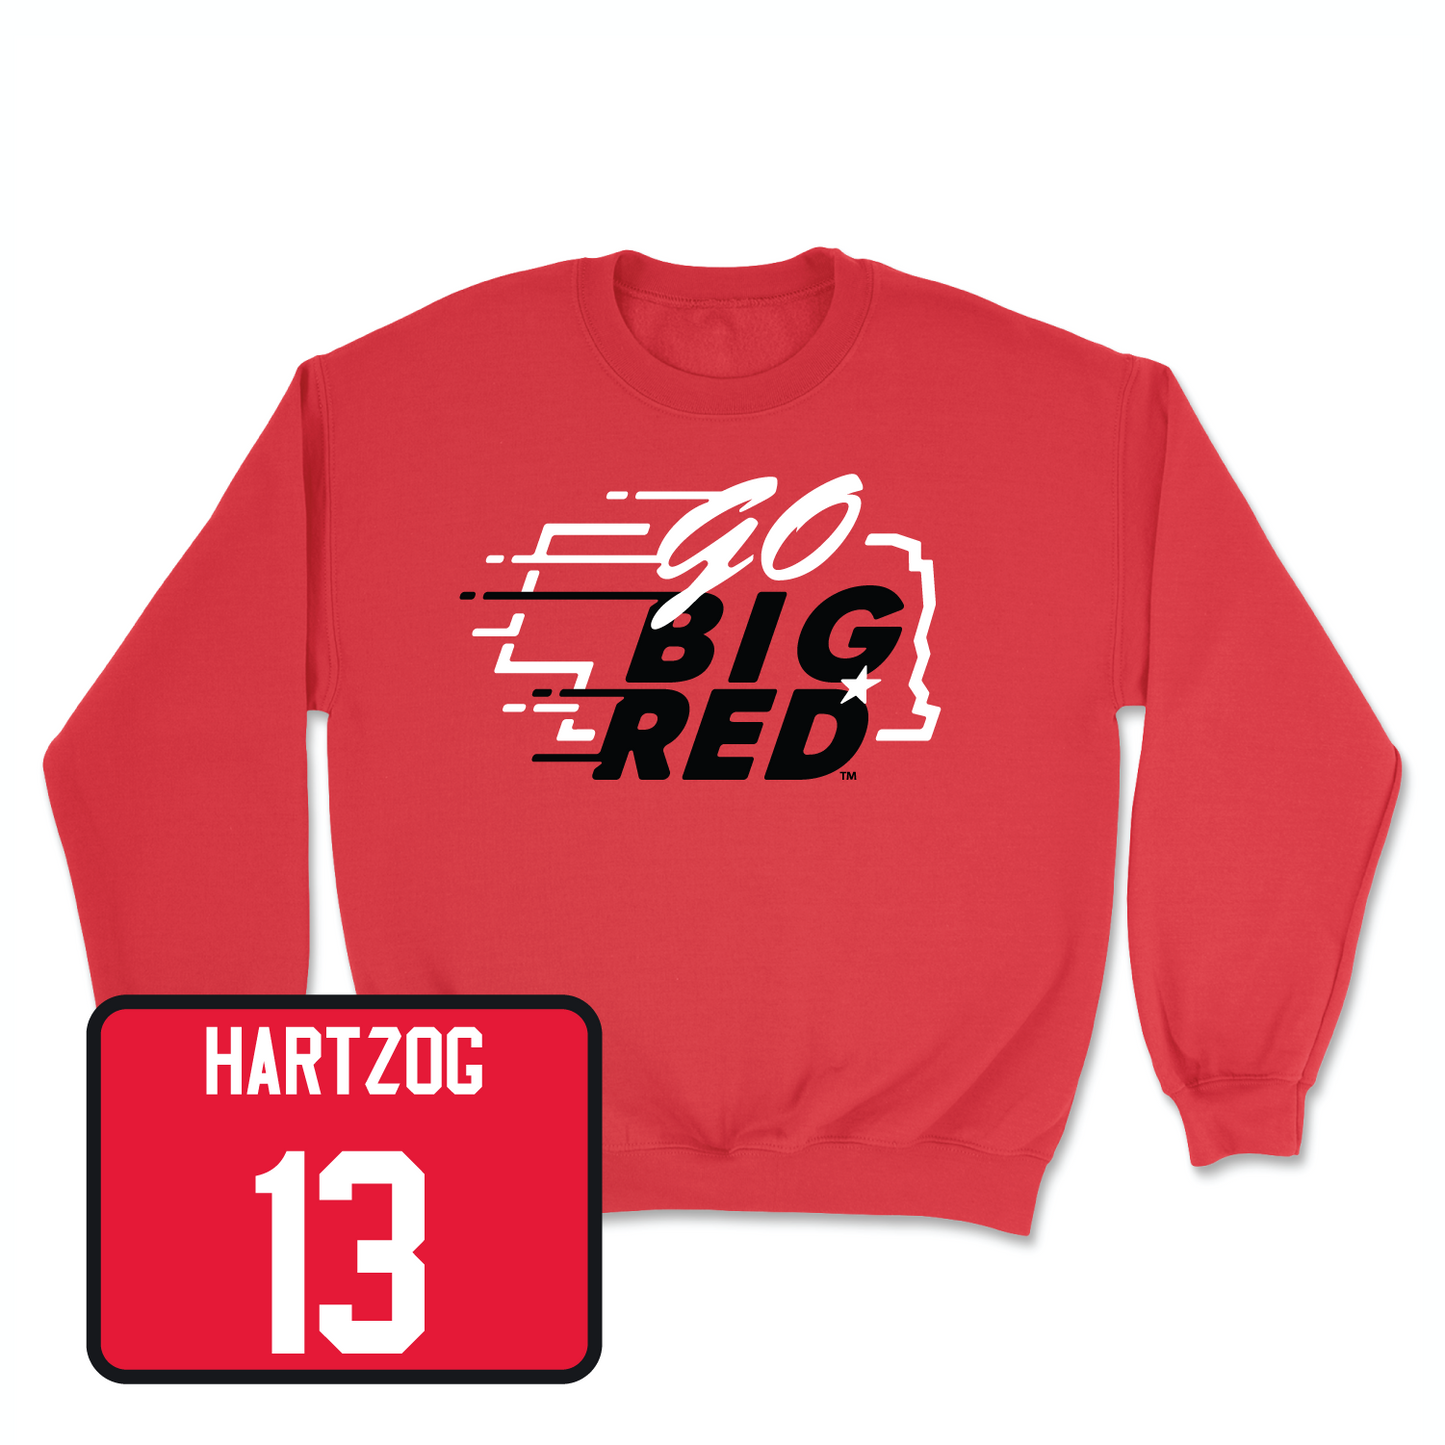 Red Football GBR Crew 2 3X-Large / Malcolm Hartzog | #13